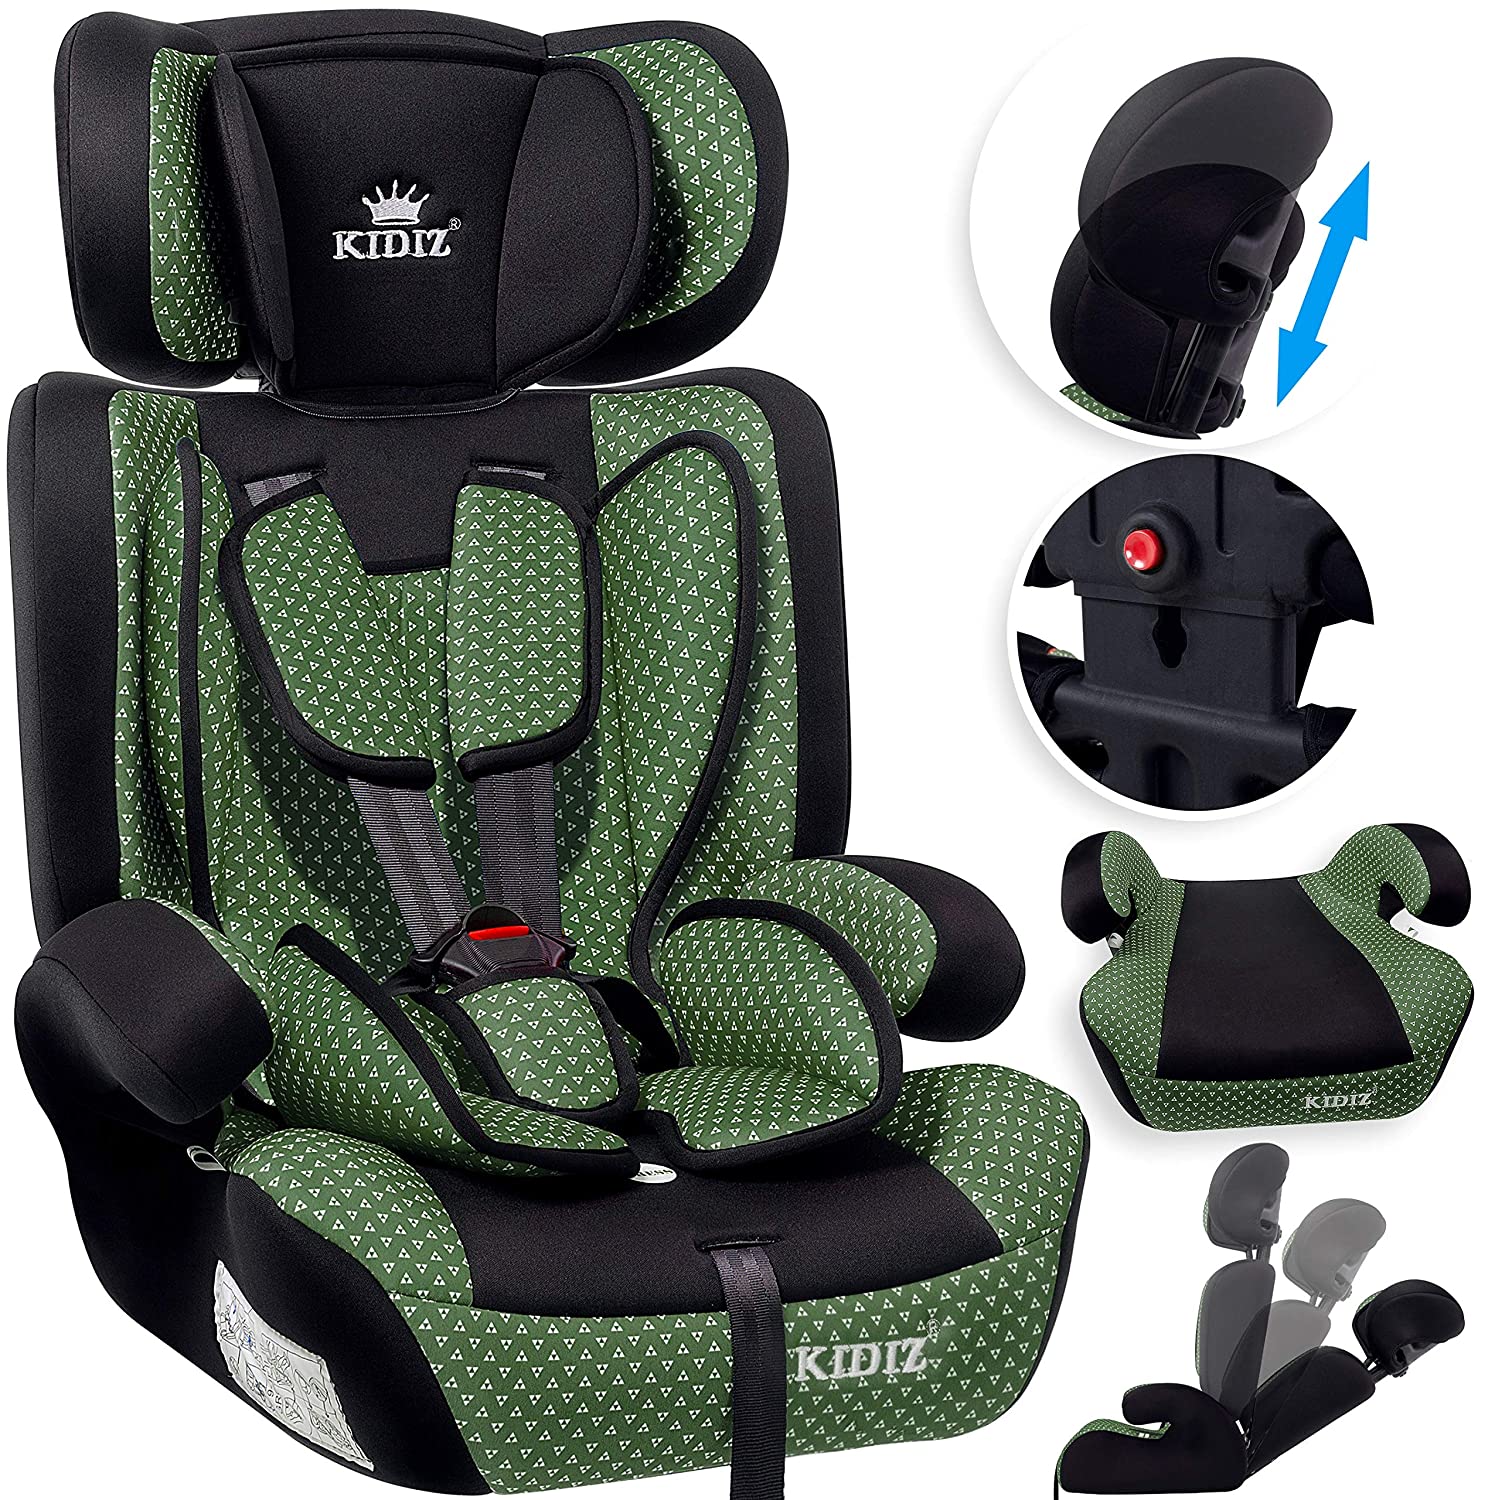 KIDIZ® Child Car Seat Child Car Seat Seat 9 kg - 36 kg 1-12 Years Group 1/2 / 3 Universal Approved according to ECE R44/04 6 Different Colours beige